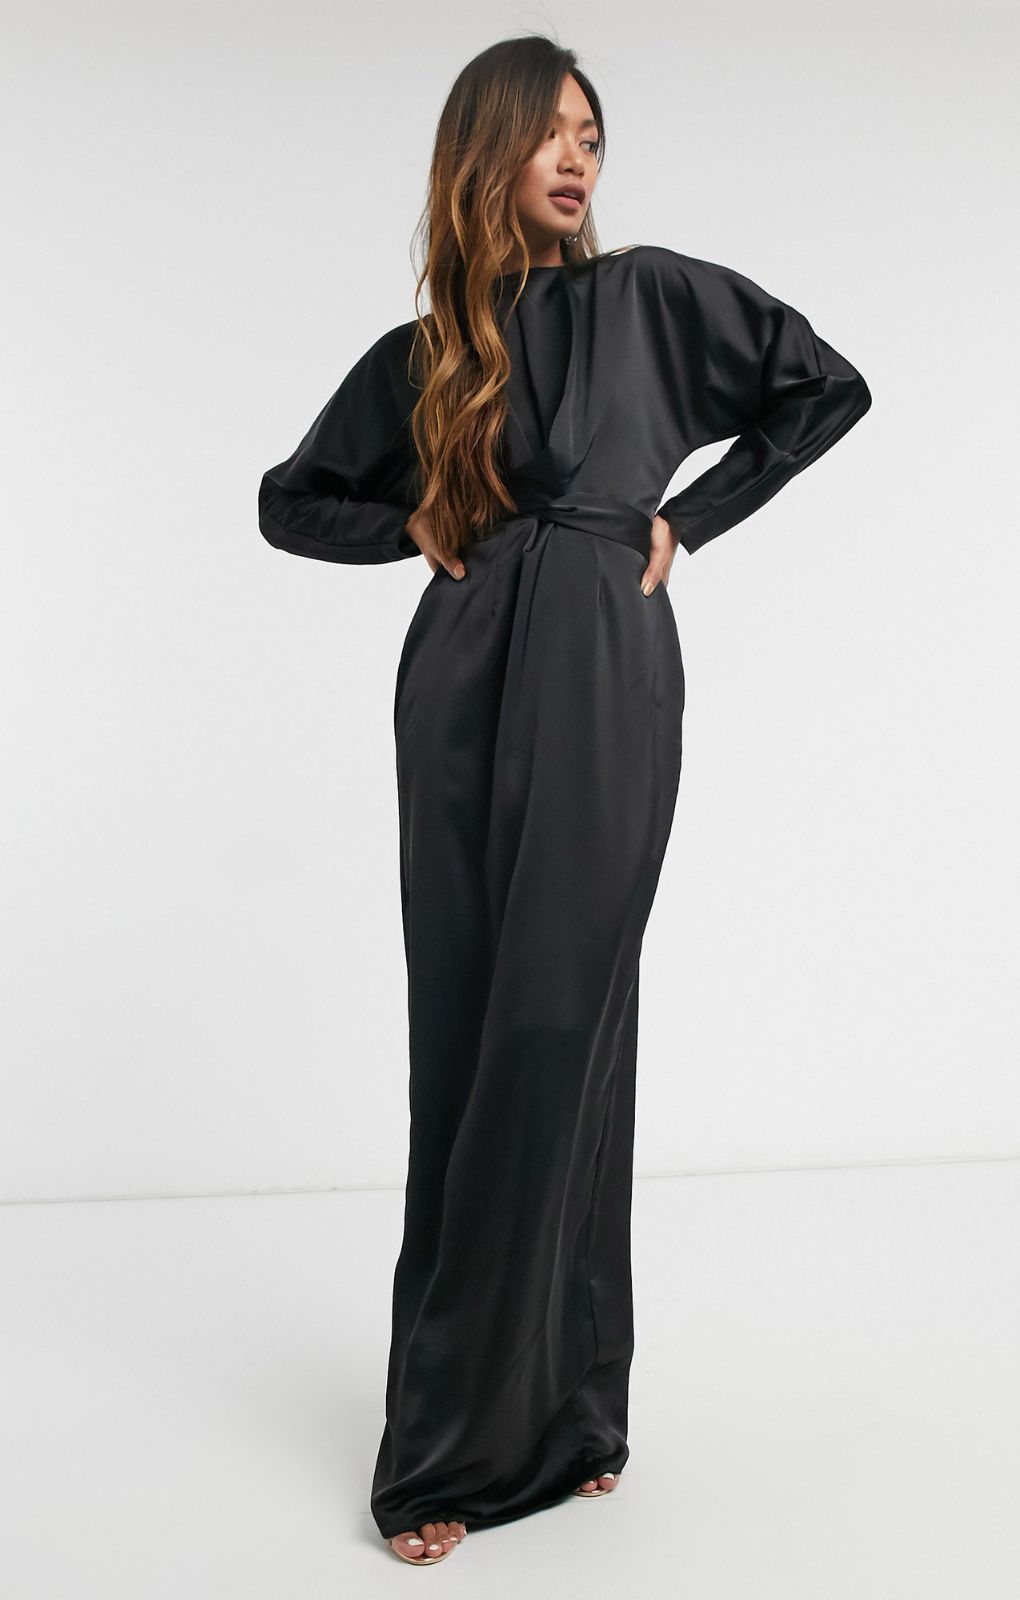 Asos Design Satin Maxi Dress With Batwing Sleeve And Wrap Waist In Black product image